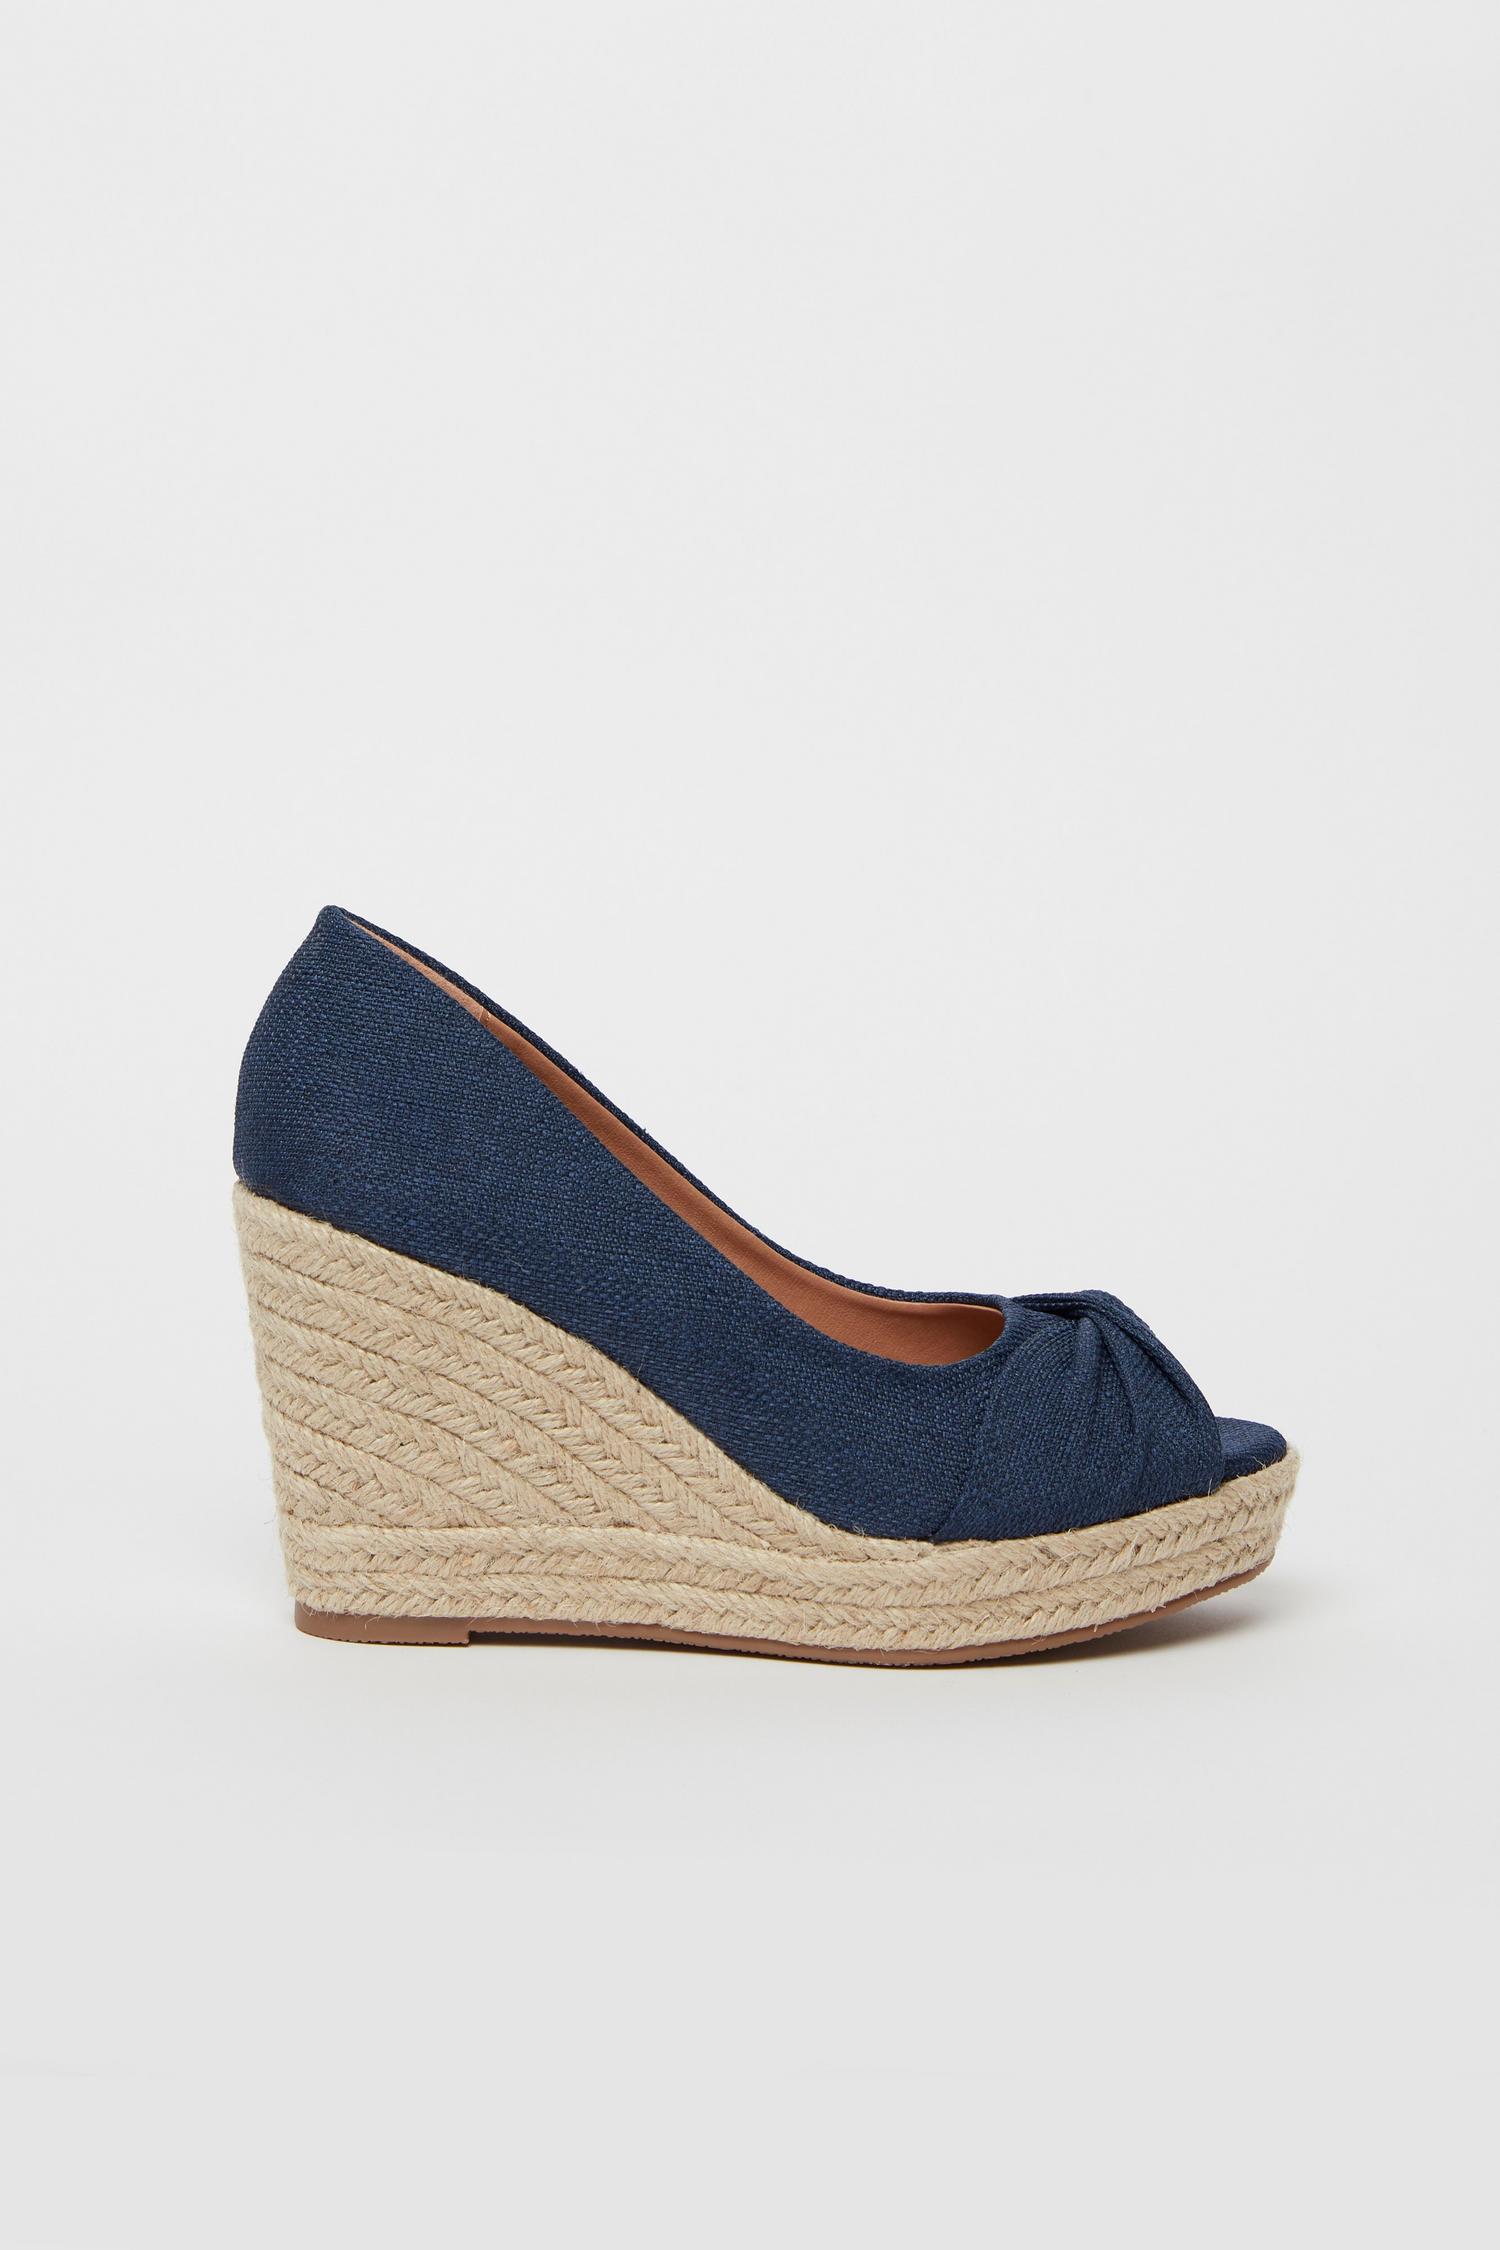 WIDE FIT Navy Knot Front Espadrille Wedge | Wallis UK